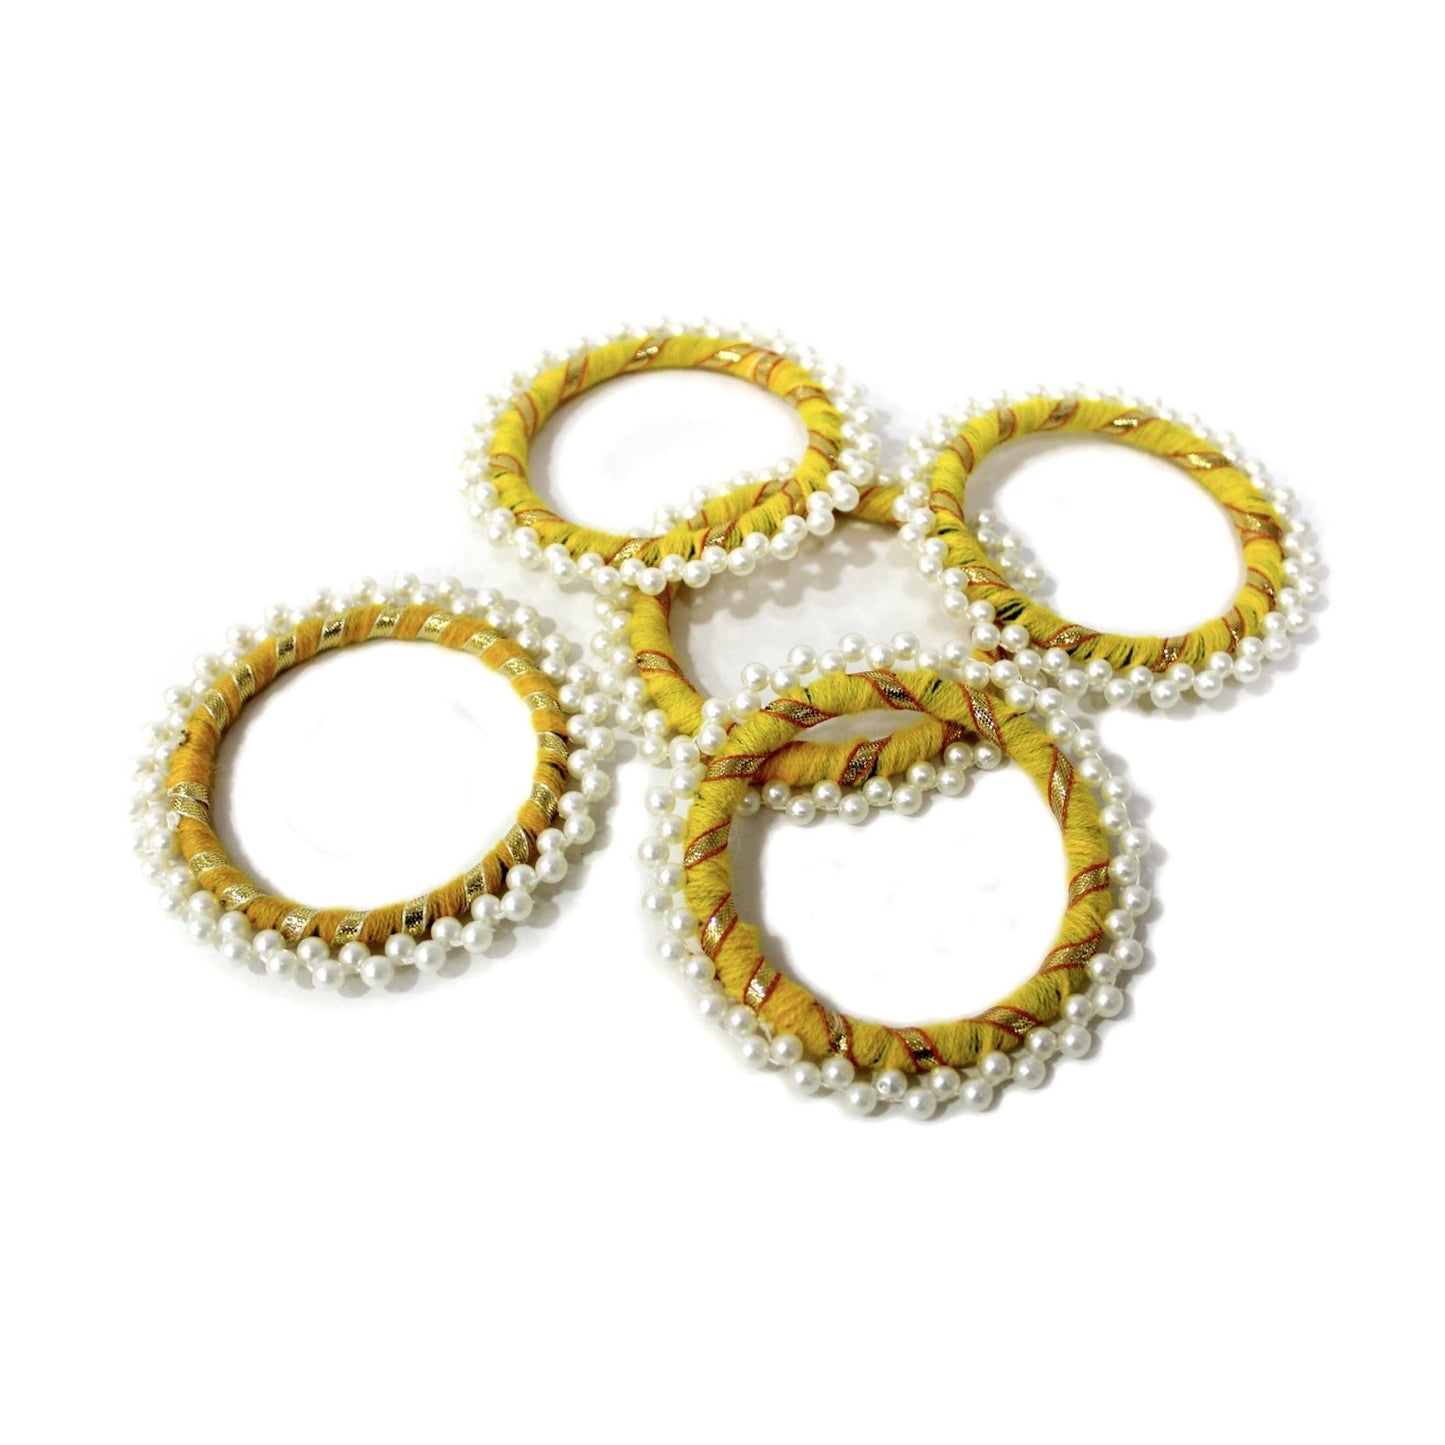 Indian Petals Threaded Round Bangle with Gota and Beads for Craft Packing Decoration - 11554, Large, Yellow